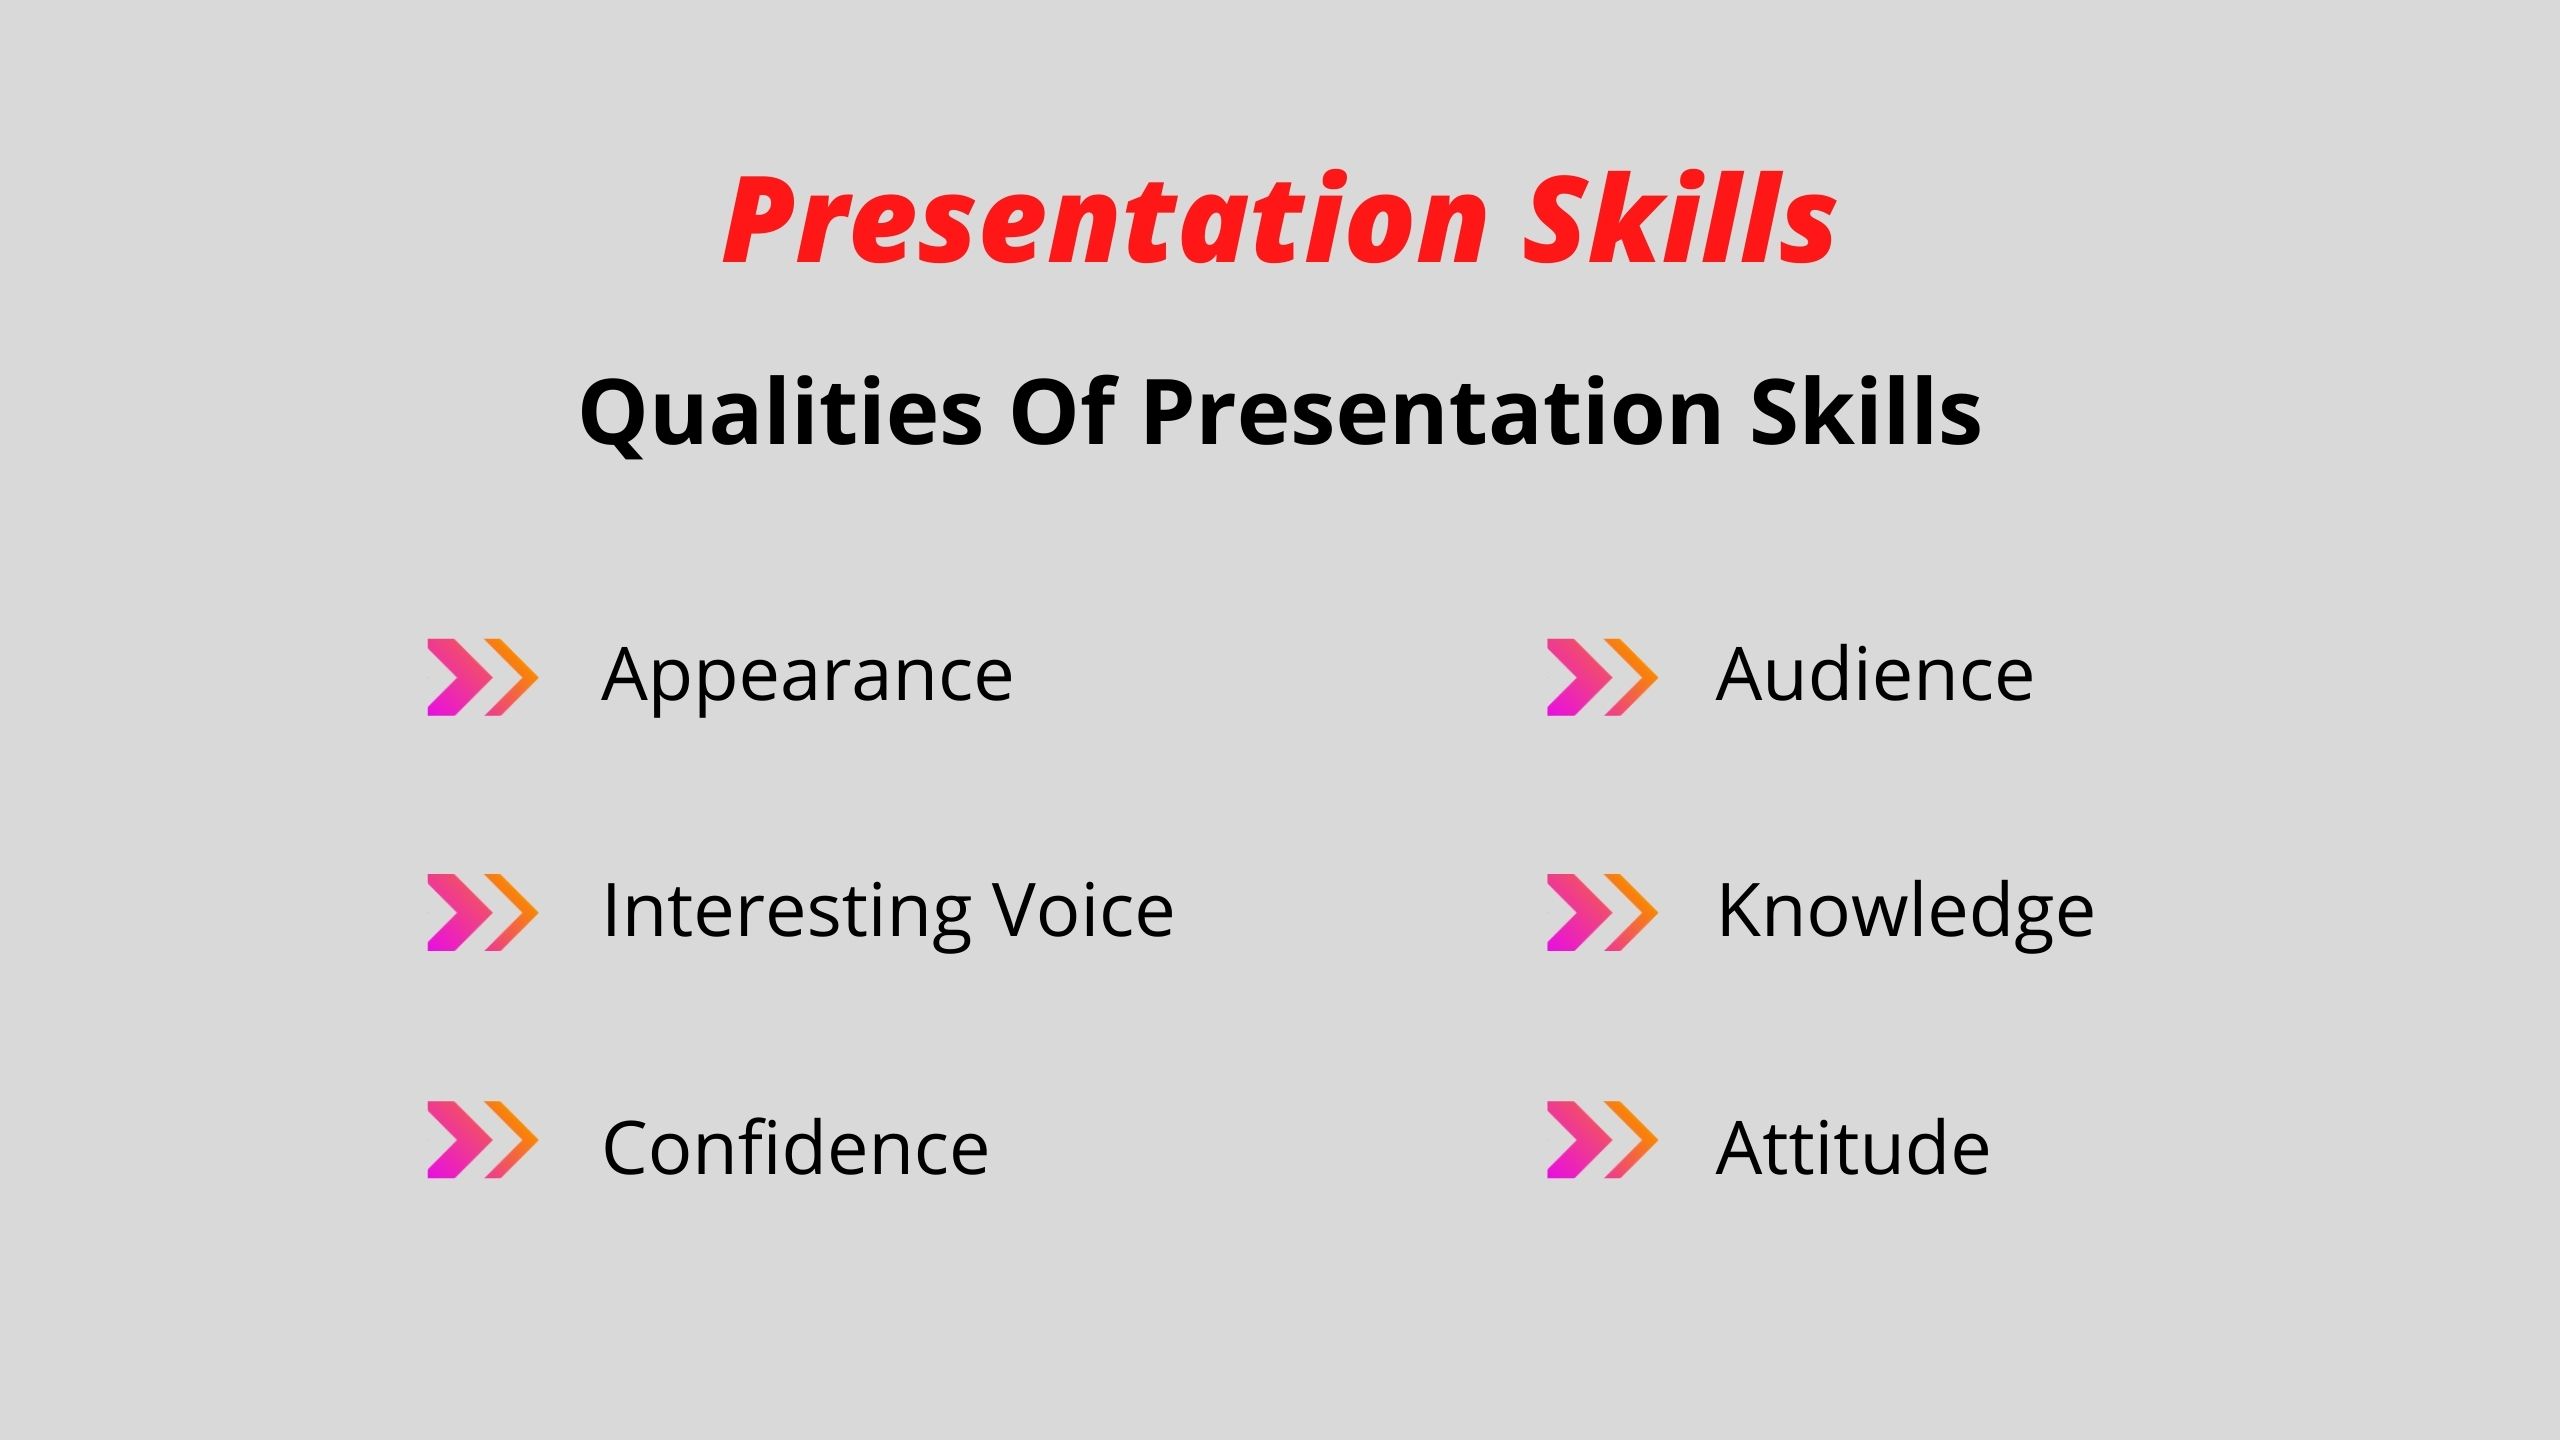 write a note on presentation skills and its types